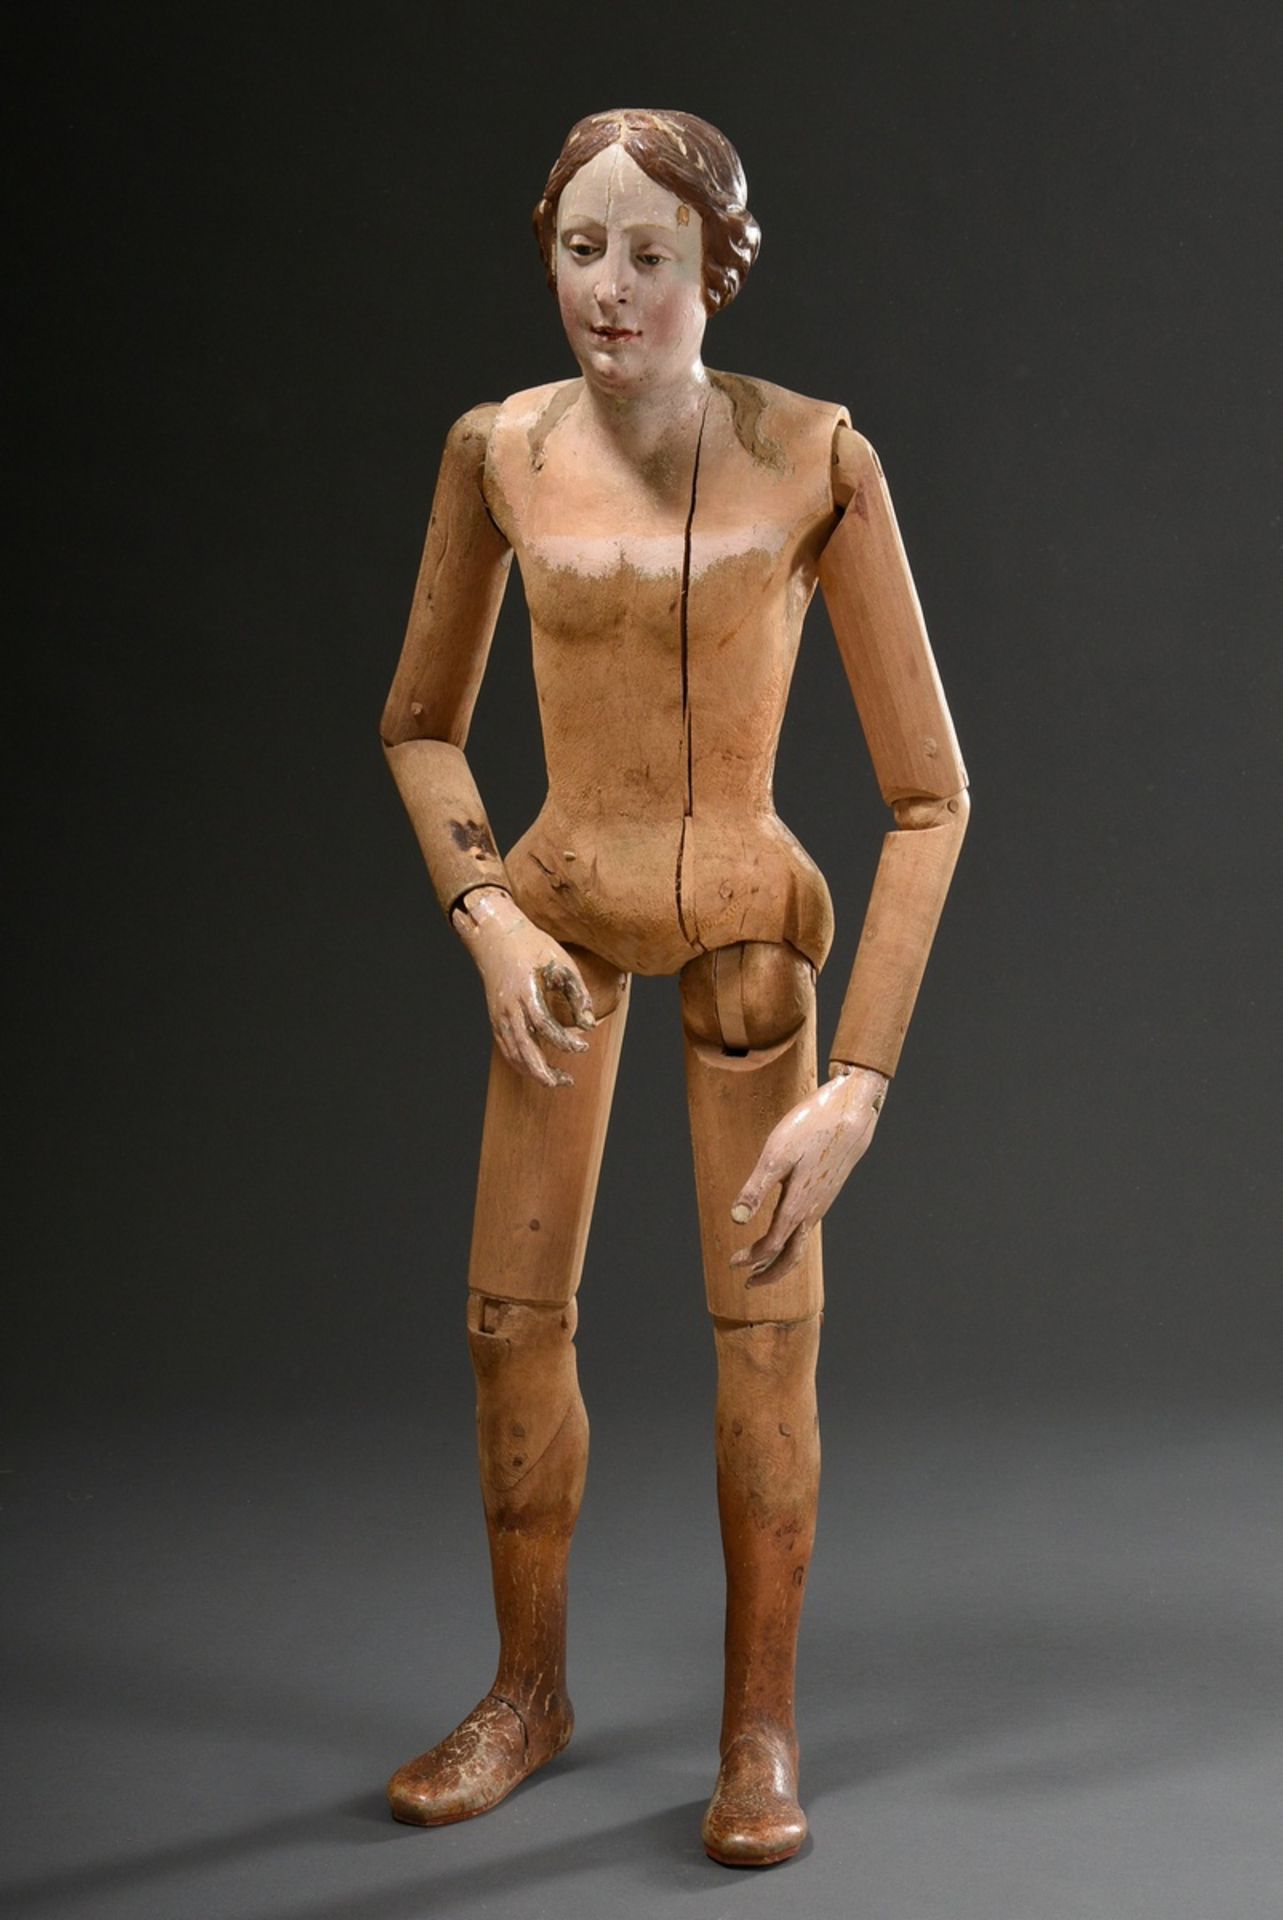 Large processional figure in original clothing with carved wooden body and movable limbs, hands and - Image 9 of 14